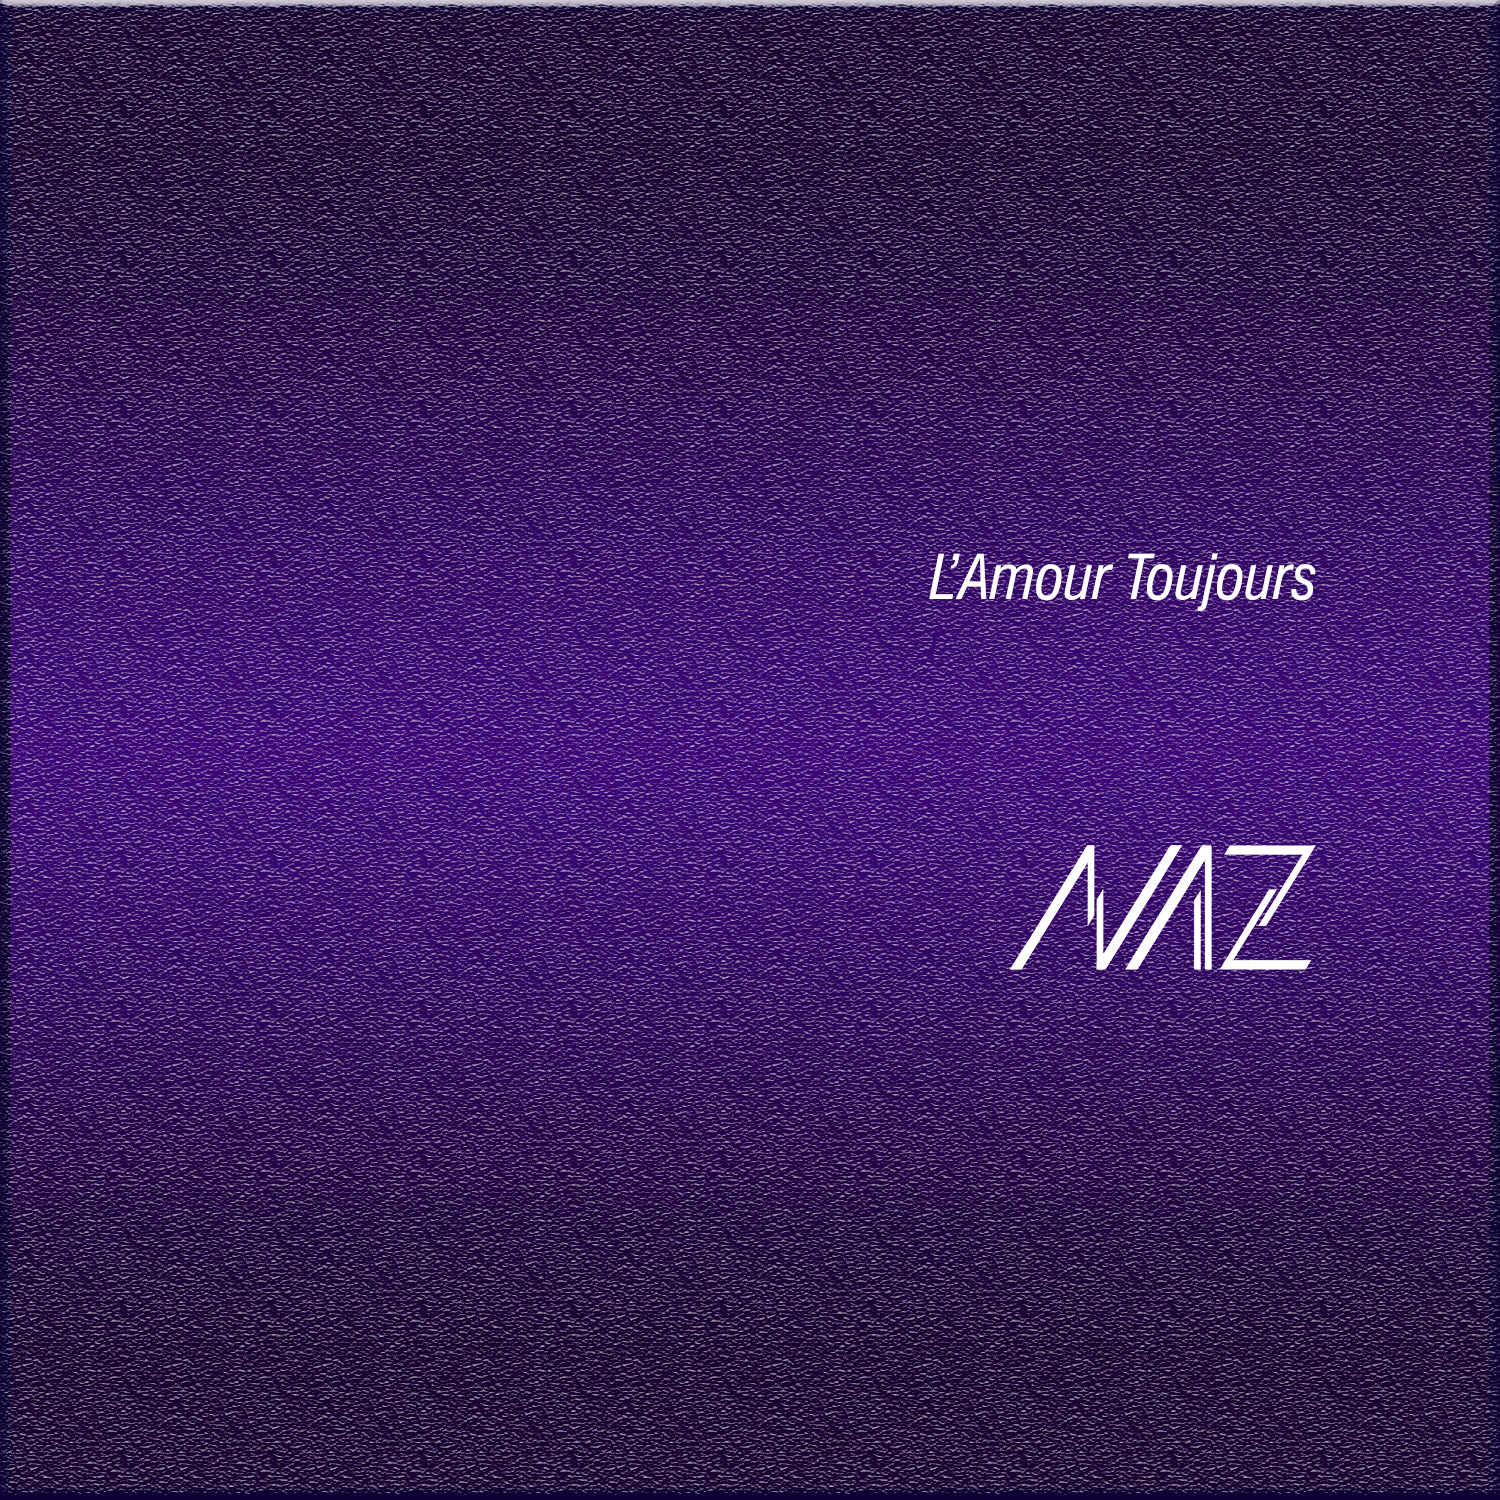 dark purple square with pattern with title of song and logo